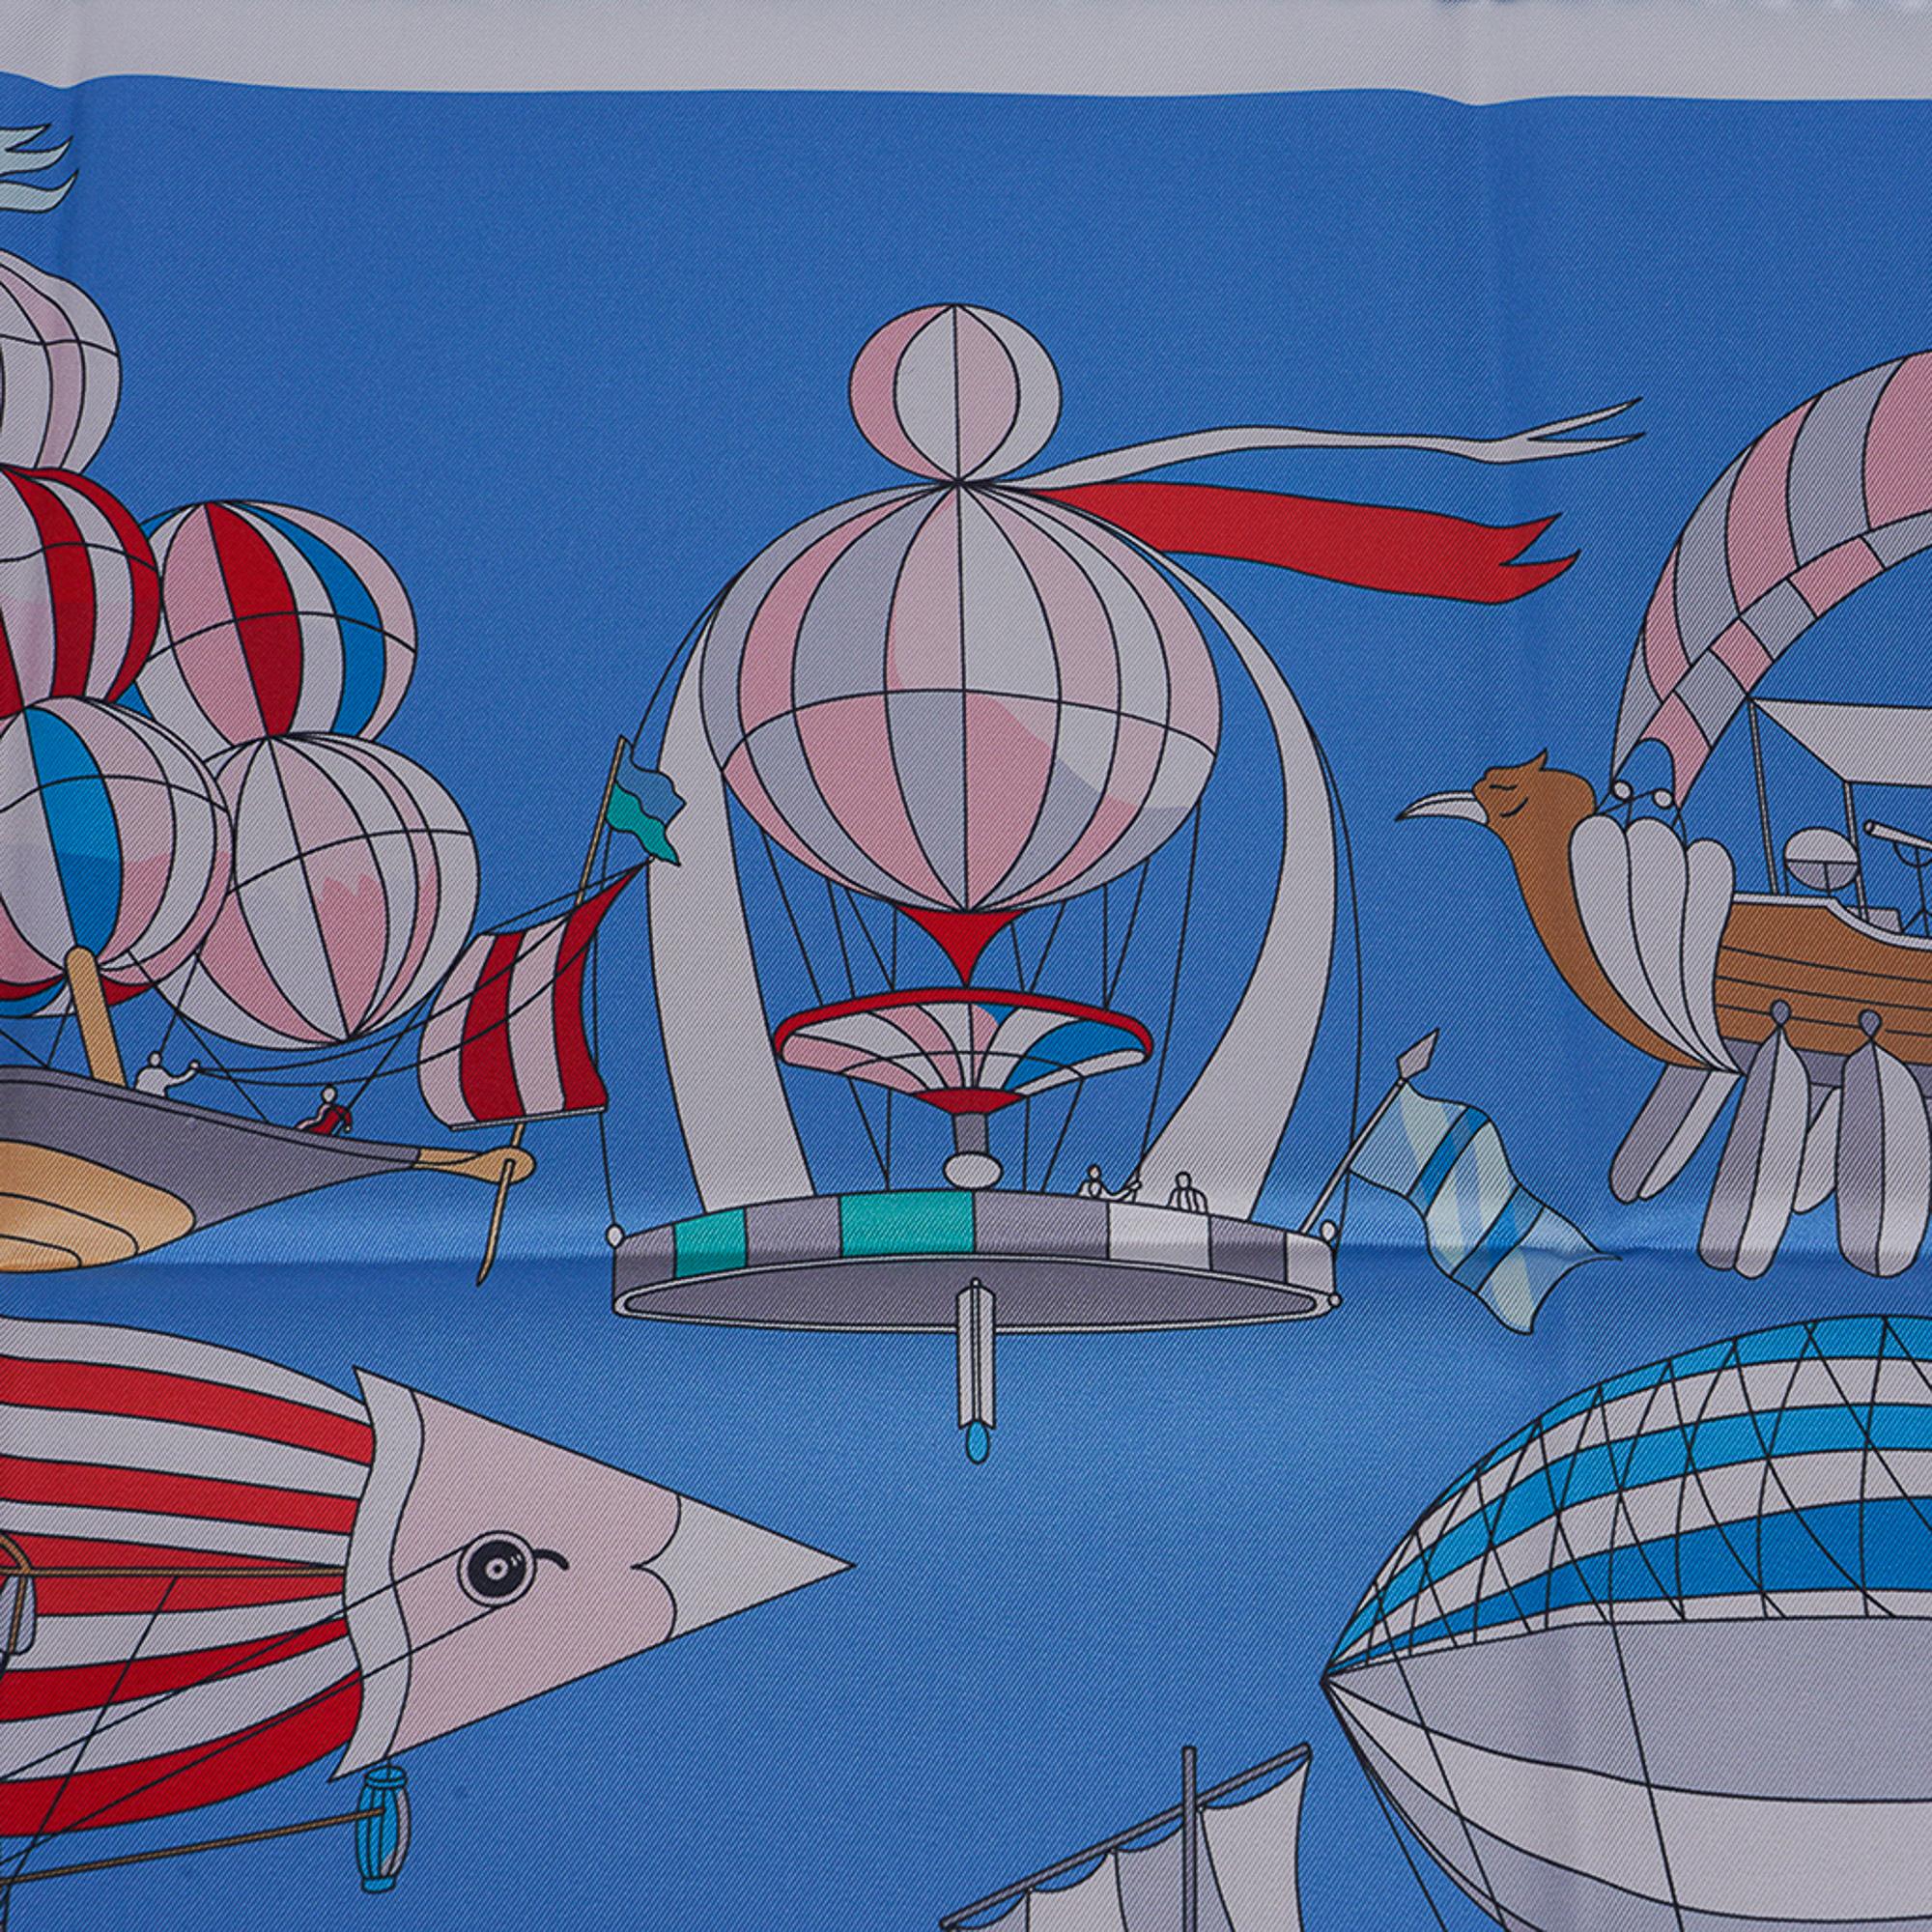 Mightychic offers an Hermes Les Folies du Ciel double Face scarf designed by Loic Dubigeon.
A special technique prints a paler version on the reverse side.
In Bleu Azur, Rose and Rouge colorway.
A fanciful depiction of flying machines.
Made in